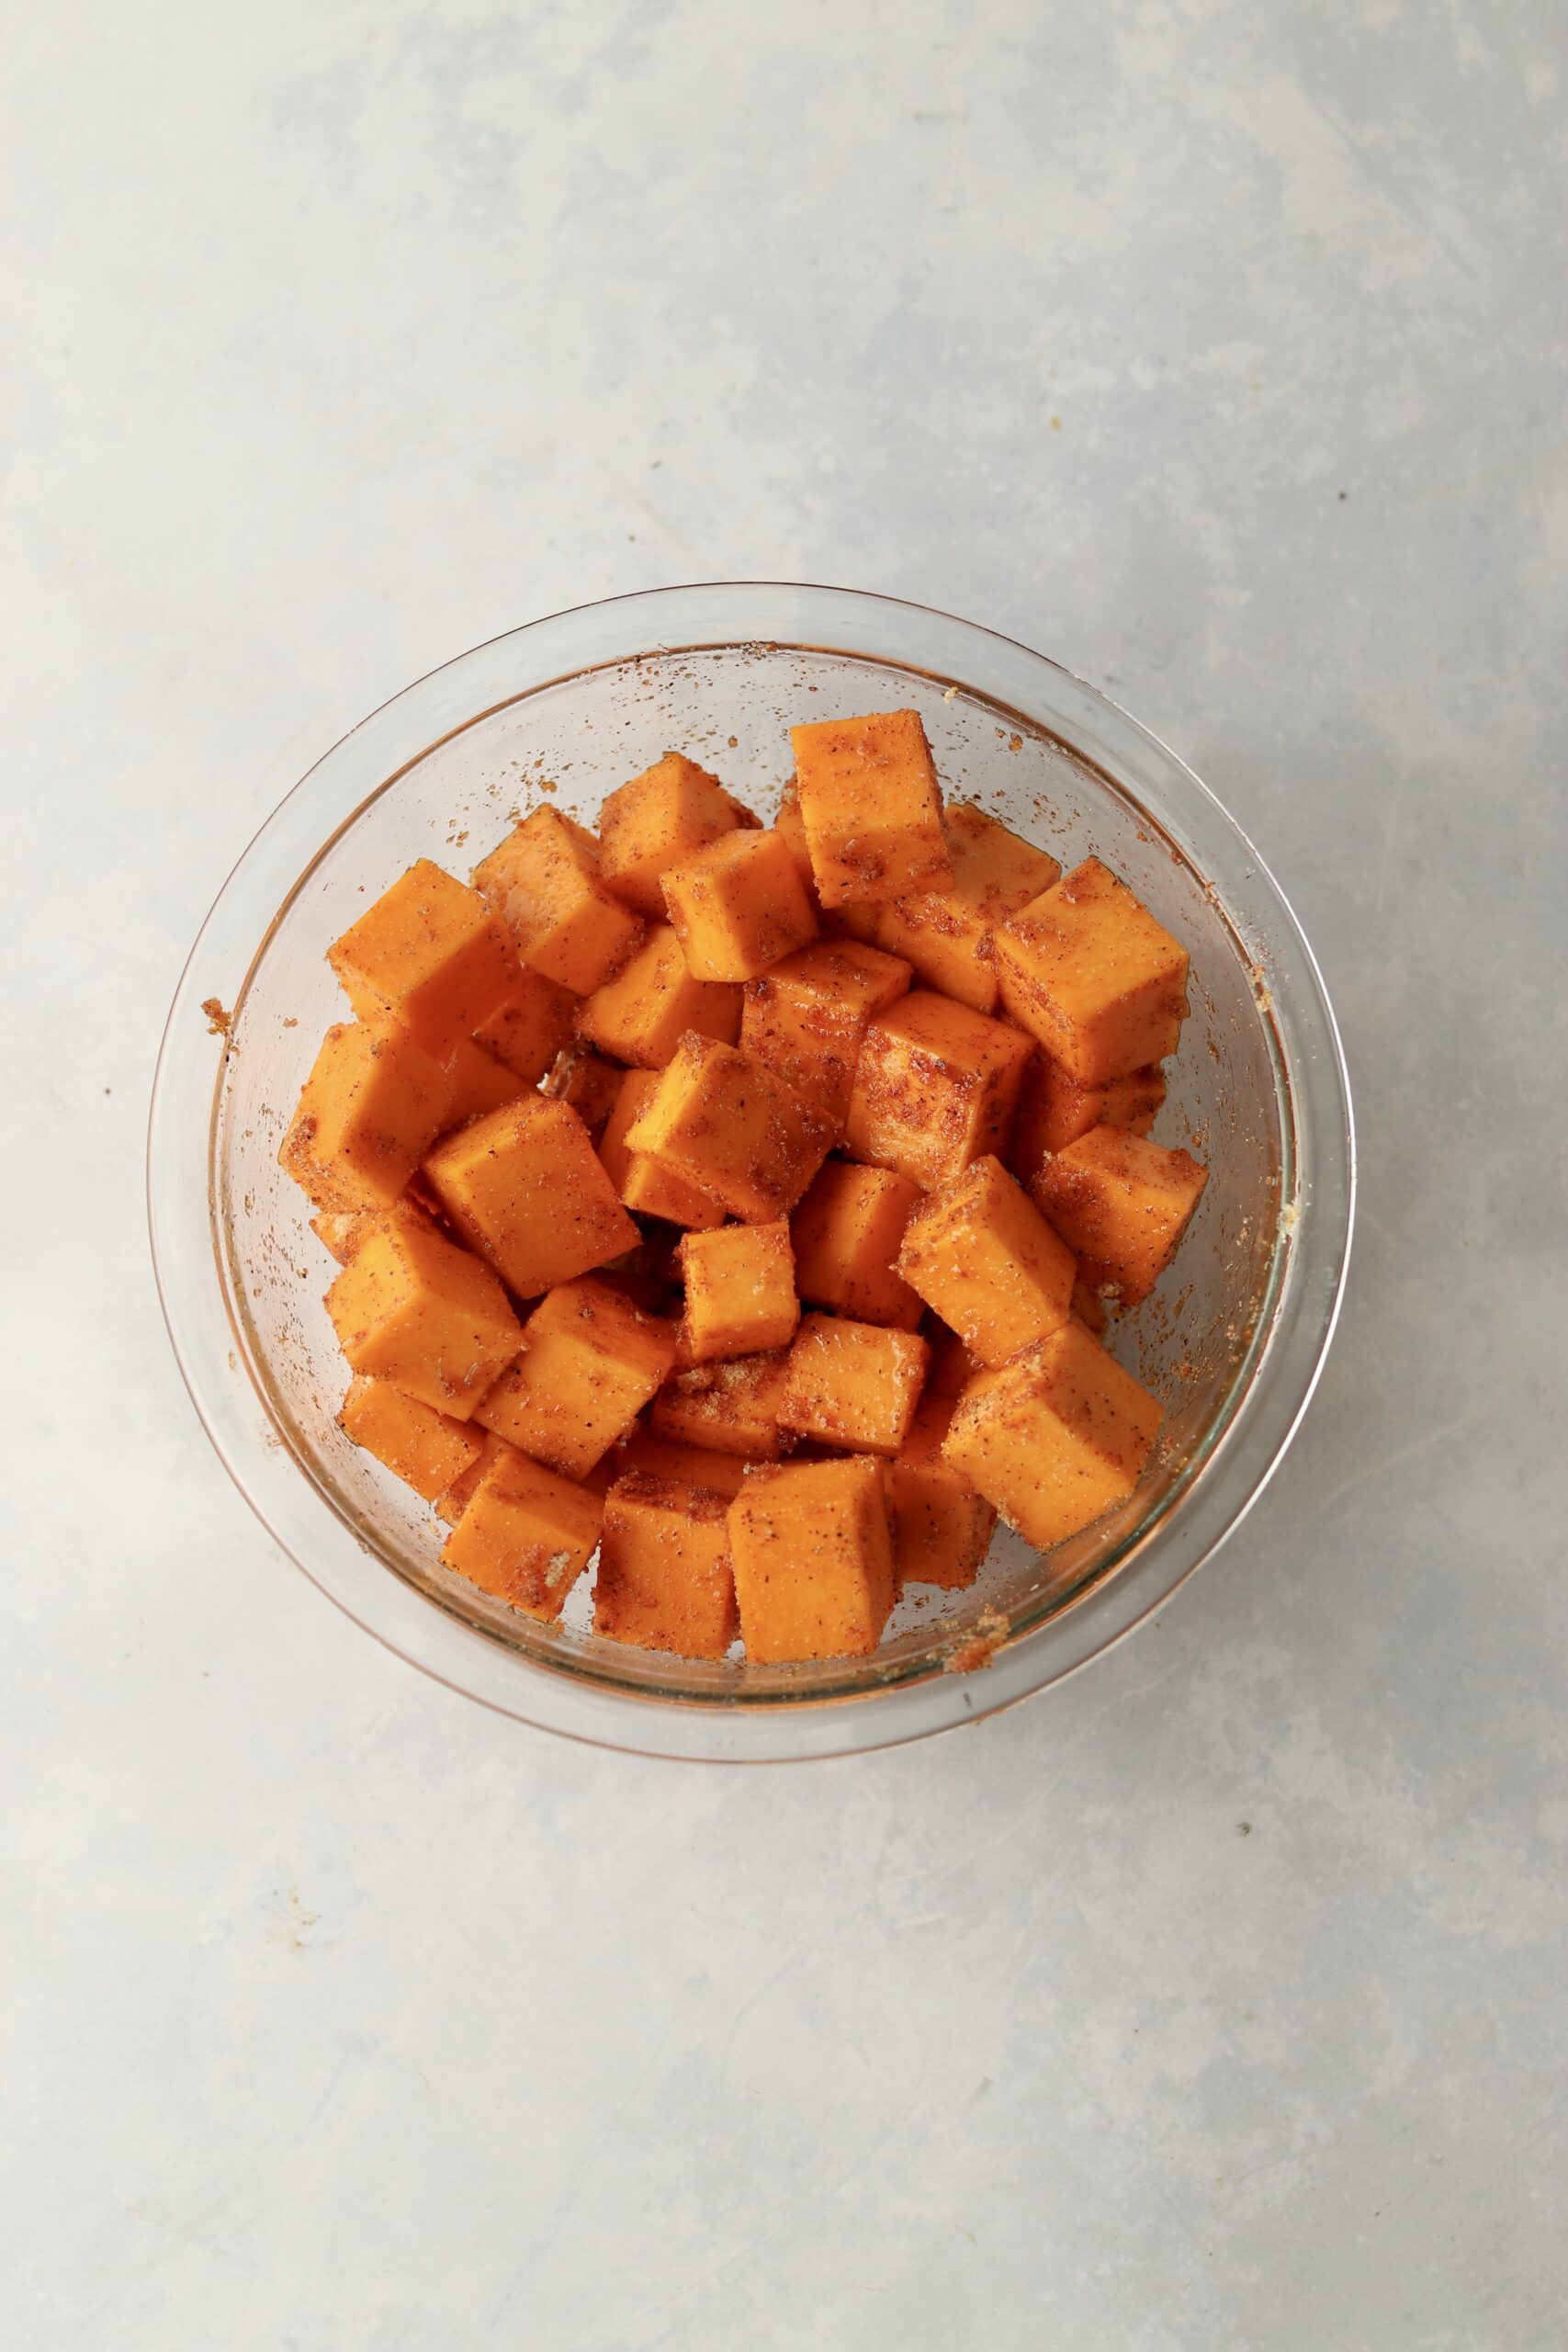 diced butternut squash tossed in oil and spices.